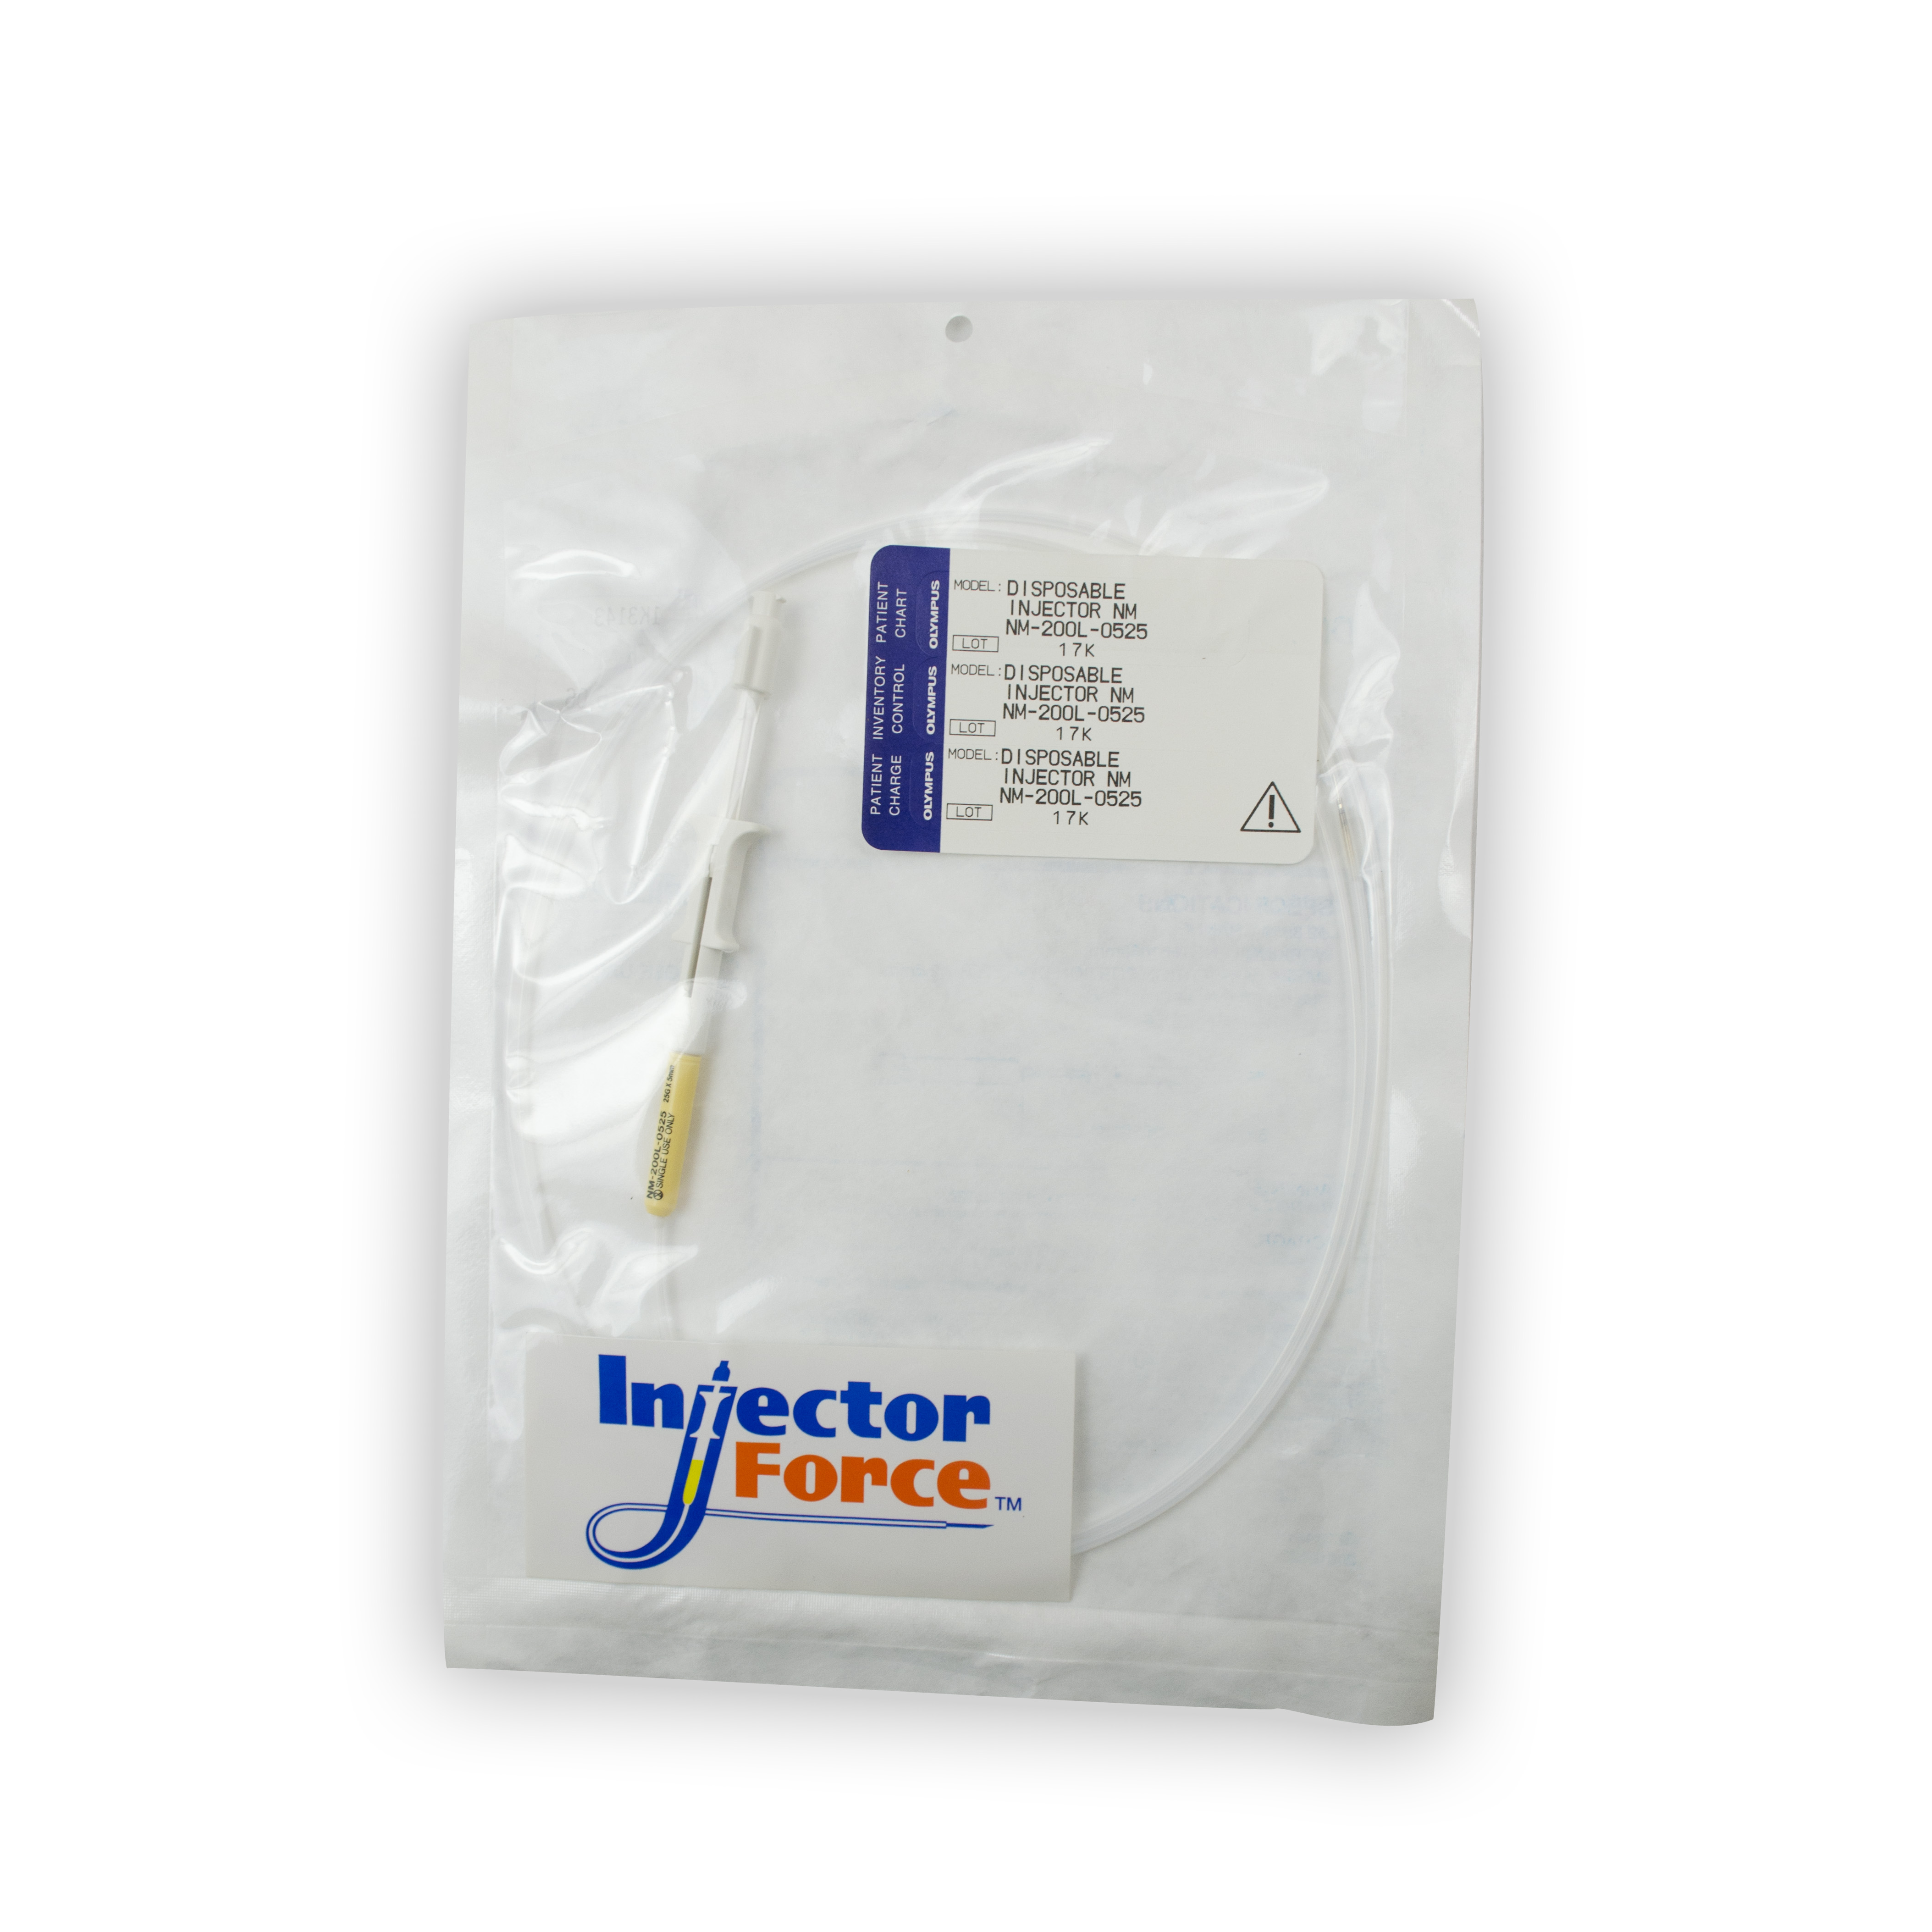 [Out-of-Date] Olympus Disposable Injection Needle - NM-200L-0525